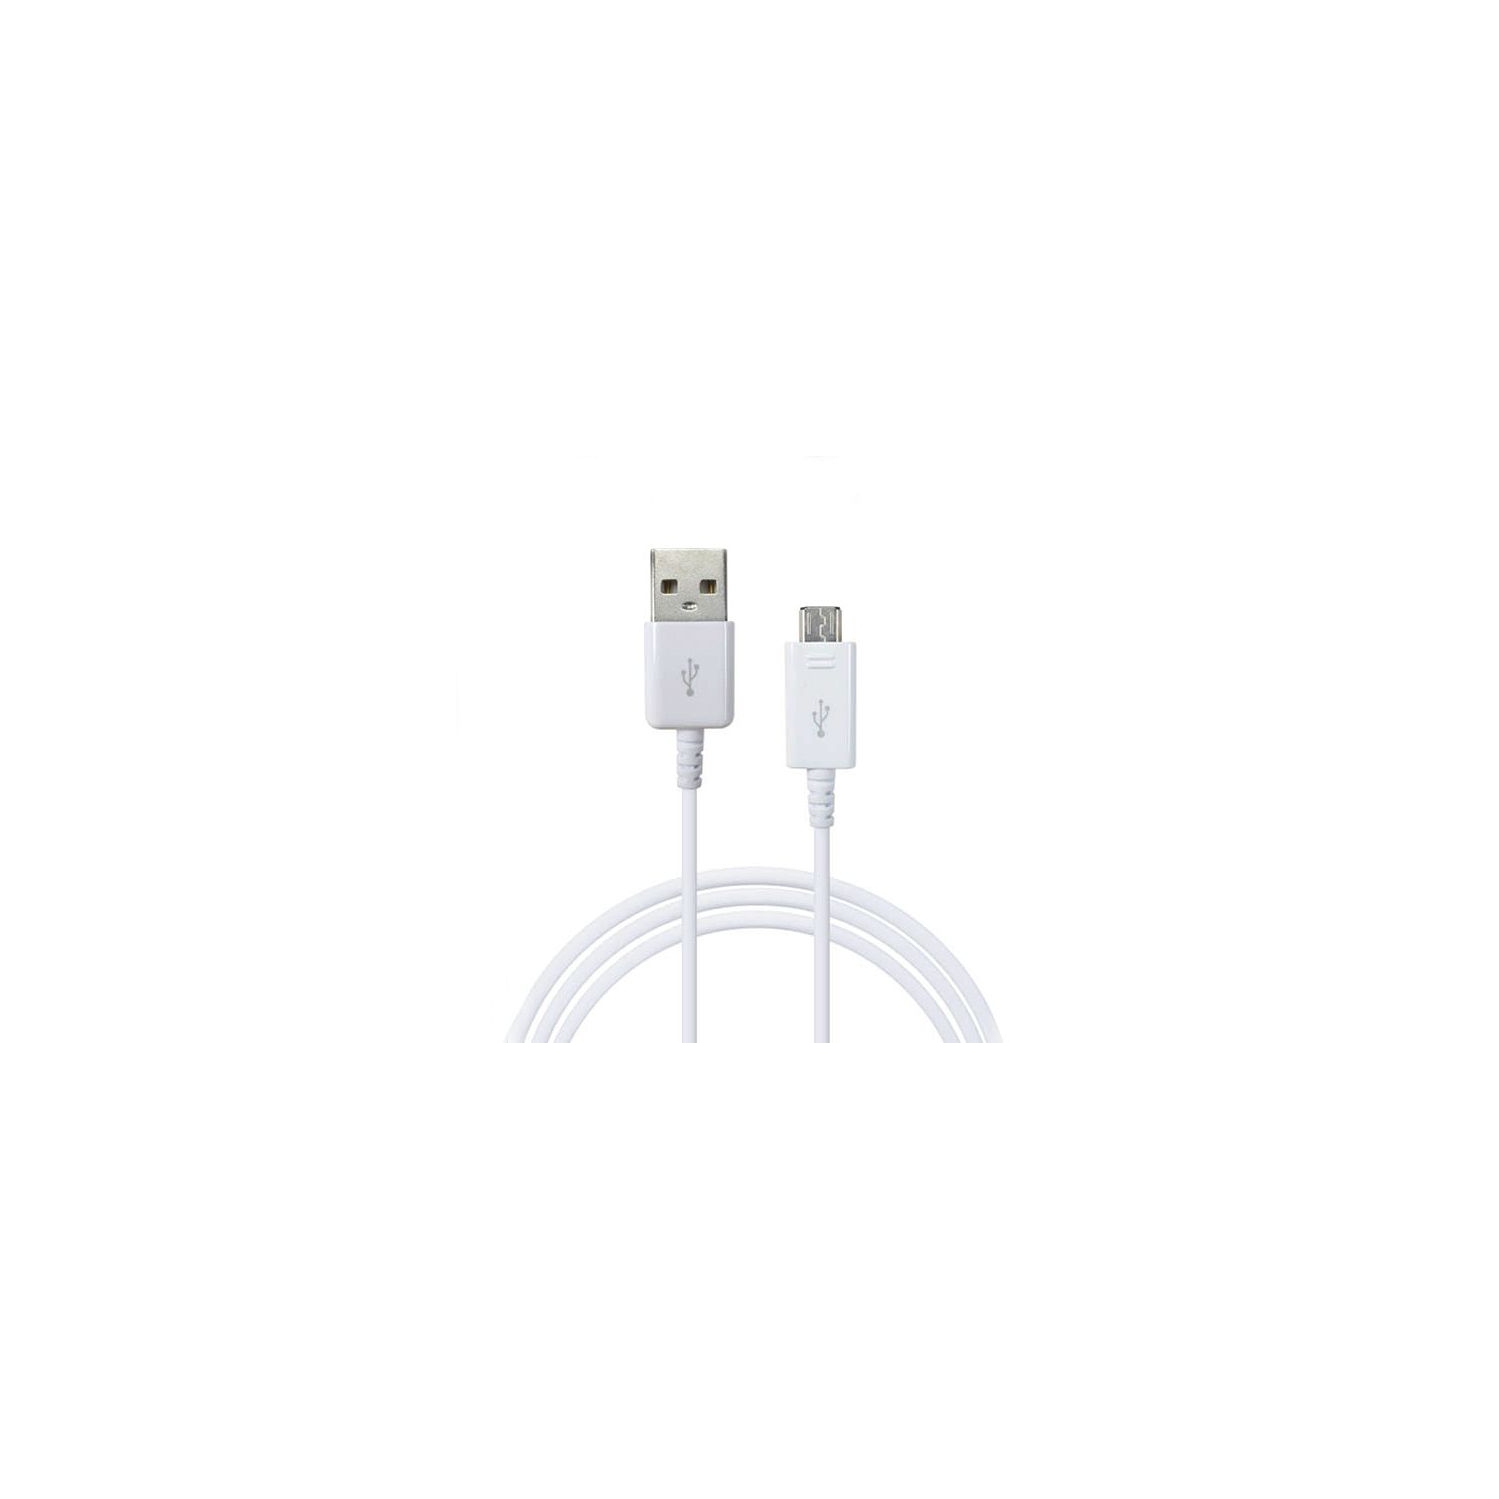 [CSmart] 4Ft/1.2M Micro USB Fast Charging Data Cable for Samsung Galaxy S6 S7 Edge Plus / S3 S4 / Note 2, White